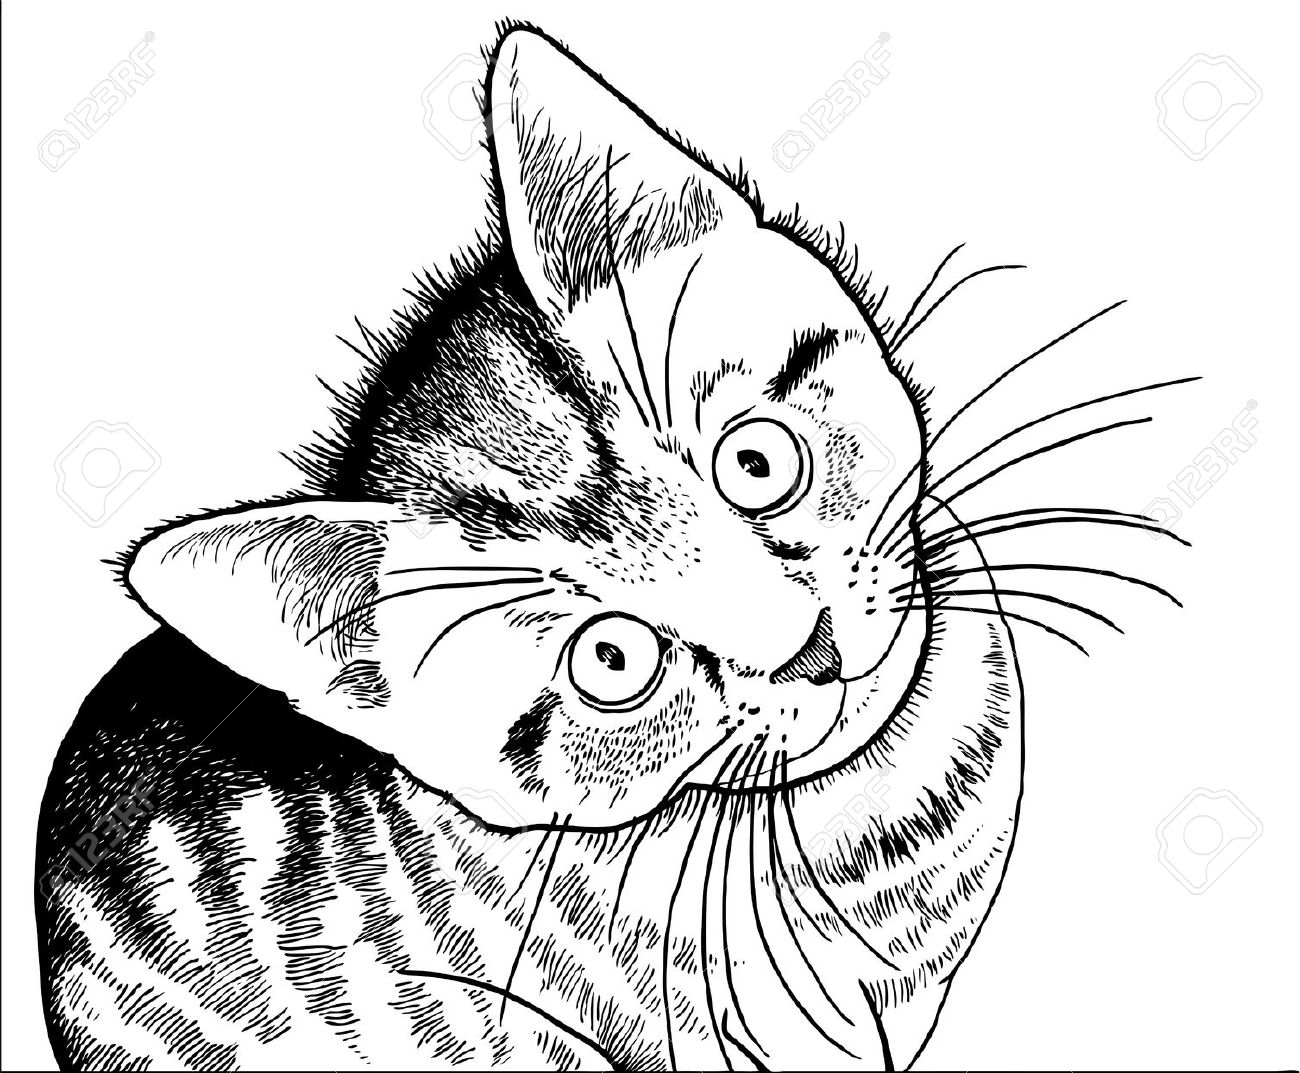 Realistic Animal Clipart Black And White Vector.